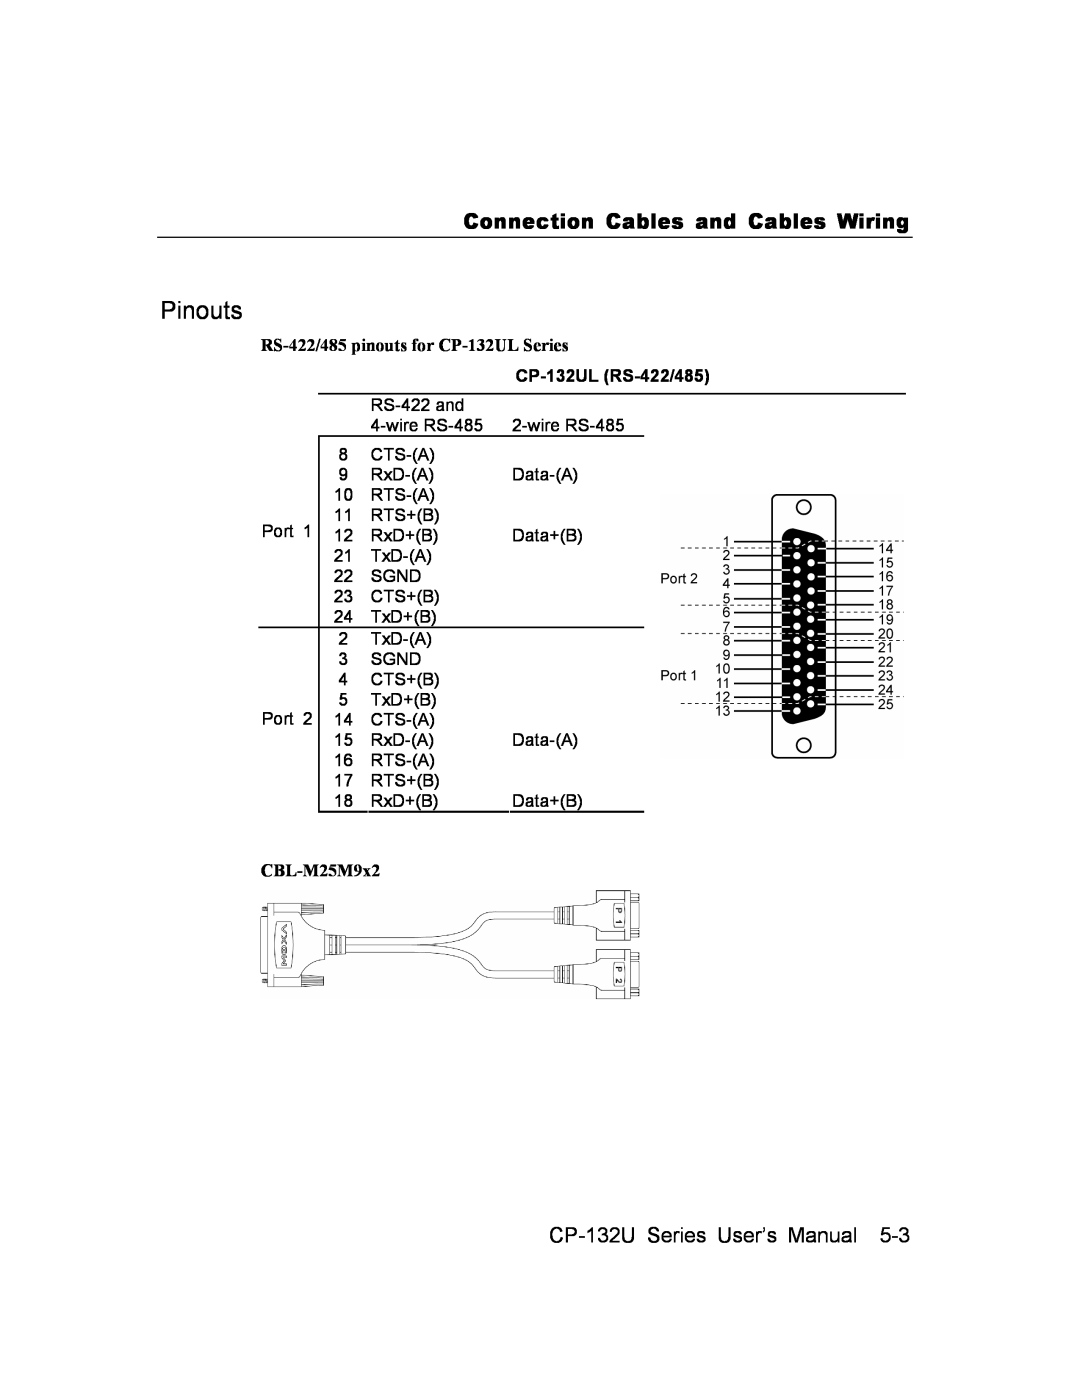 Moxa Technologies CP-132U Series Pinouts, Connection Cables and Cables Wiring, RS-422/485 pinouts for CP-132UL Series 